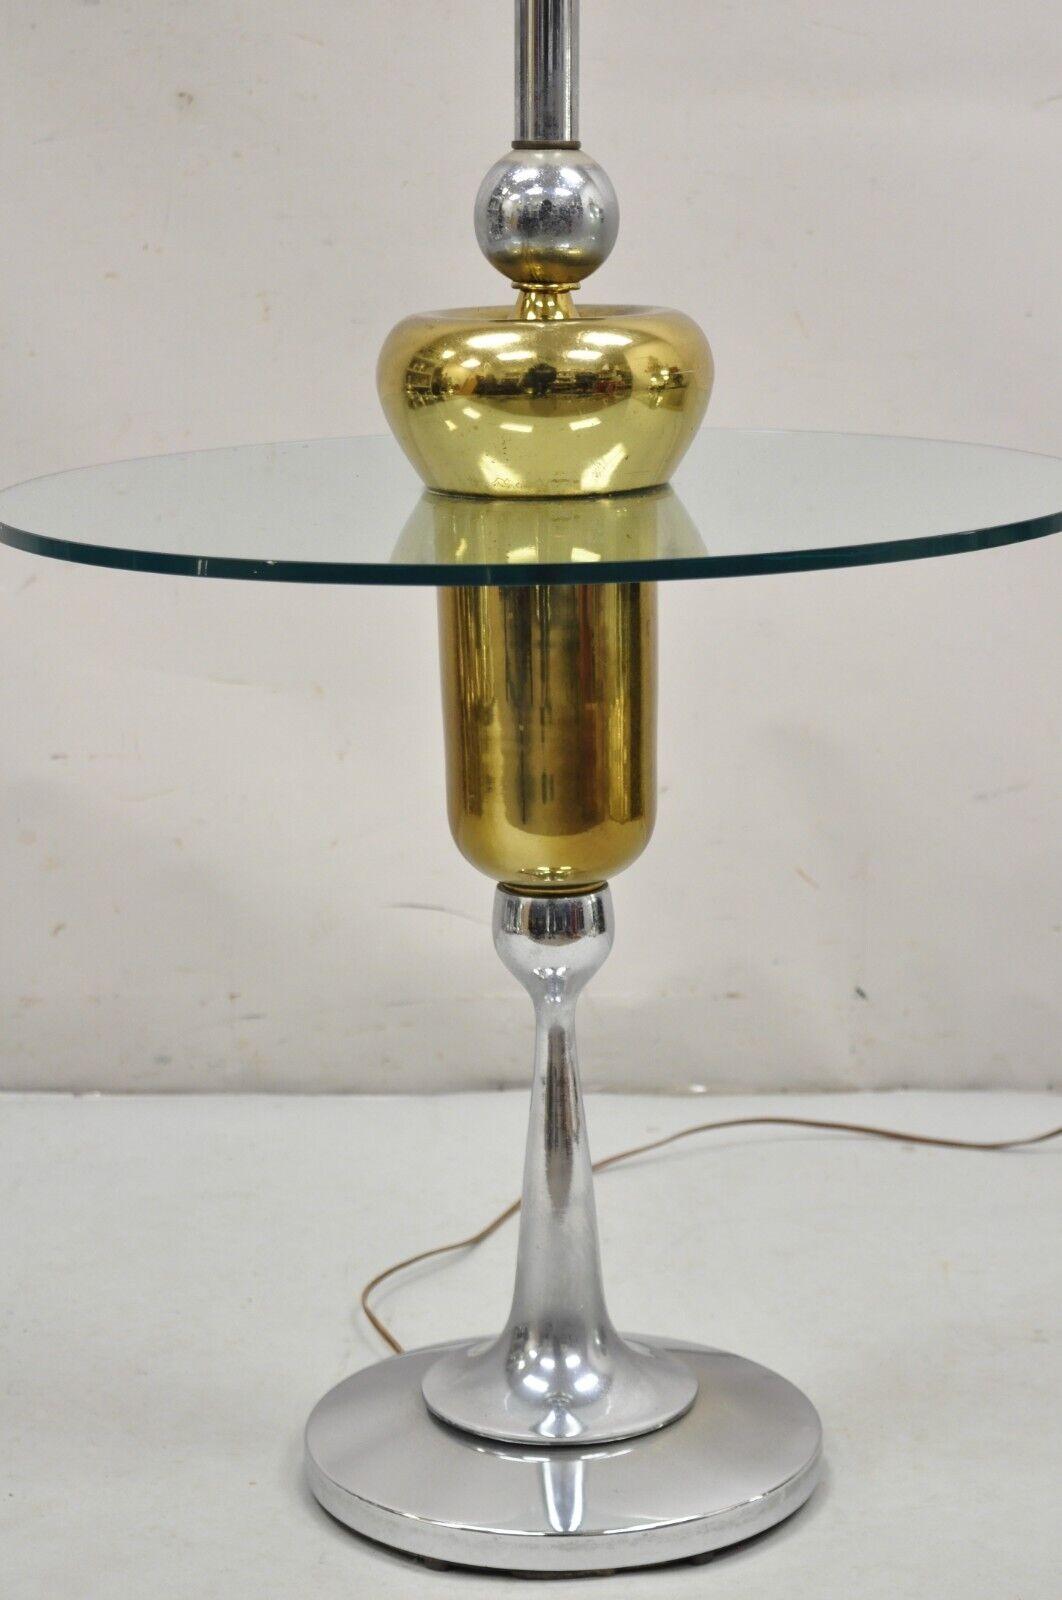 Vintage Mid Century Modern Space Age Atomic Era Chrome Brass & Glass Side Table / Floor Lamp. Circa 1970s.
Measurements: 
Overall: 57